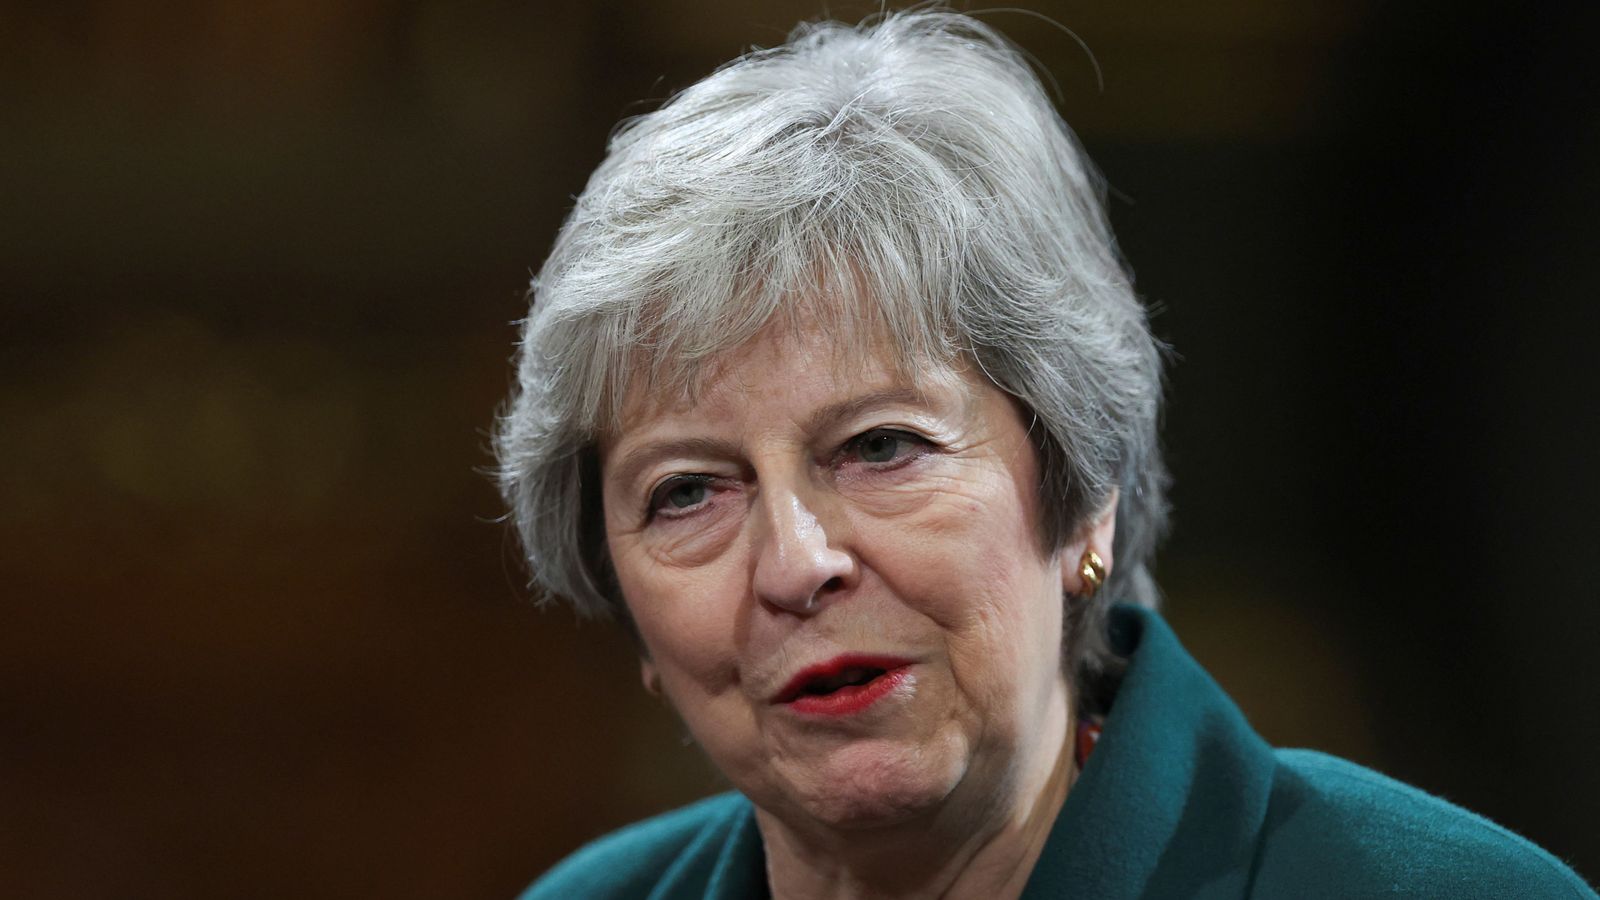 Former prime minister Theresa May given peerage